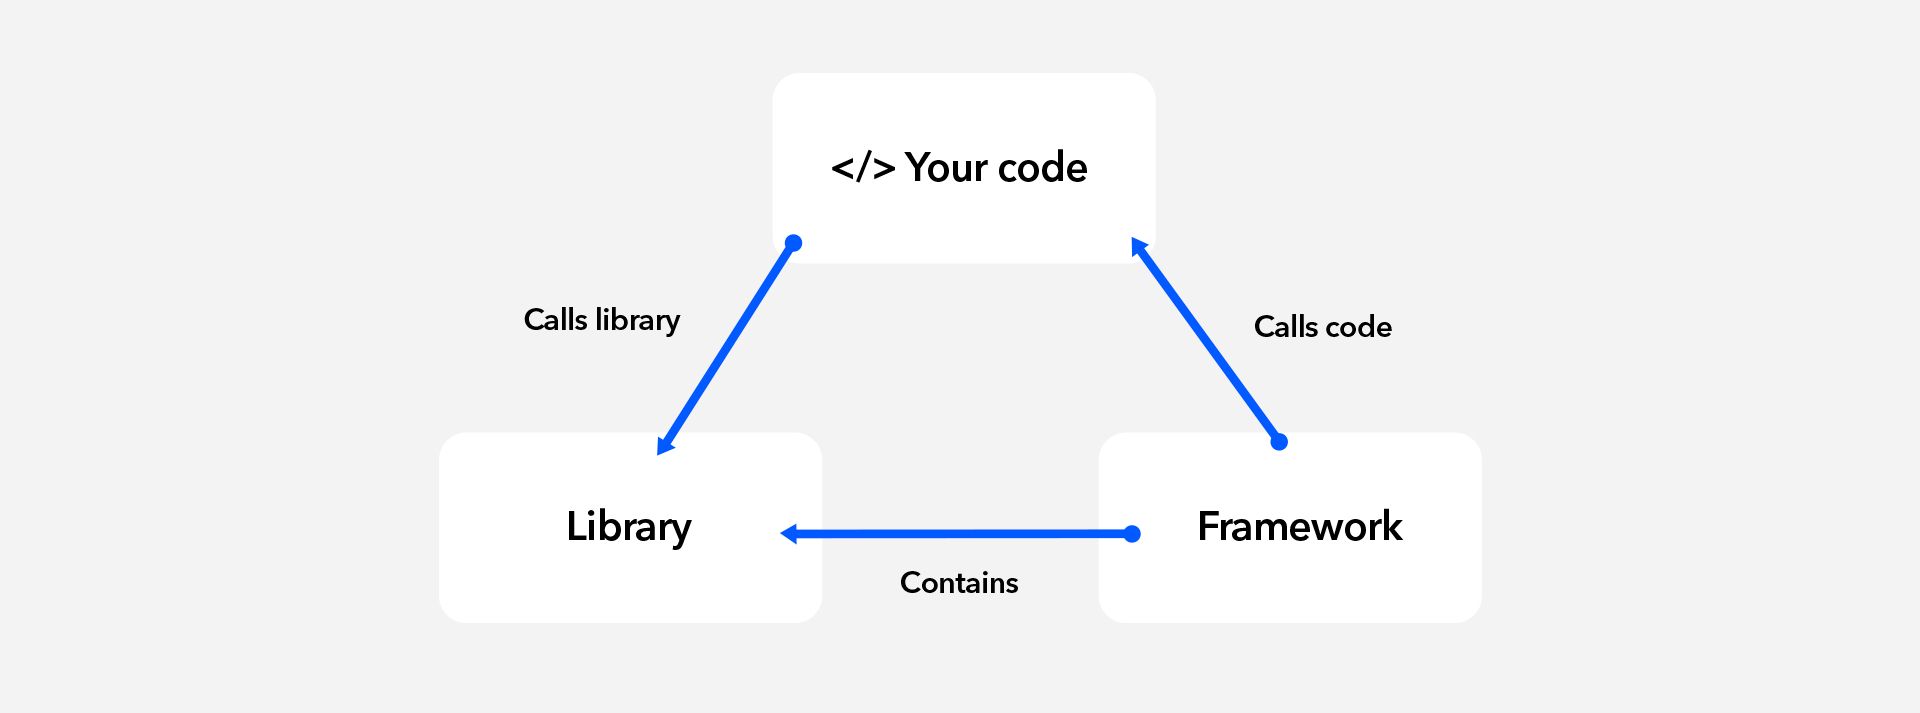 Diagram explaining the Inversion of Control (IoC) between frameworks and libraries.